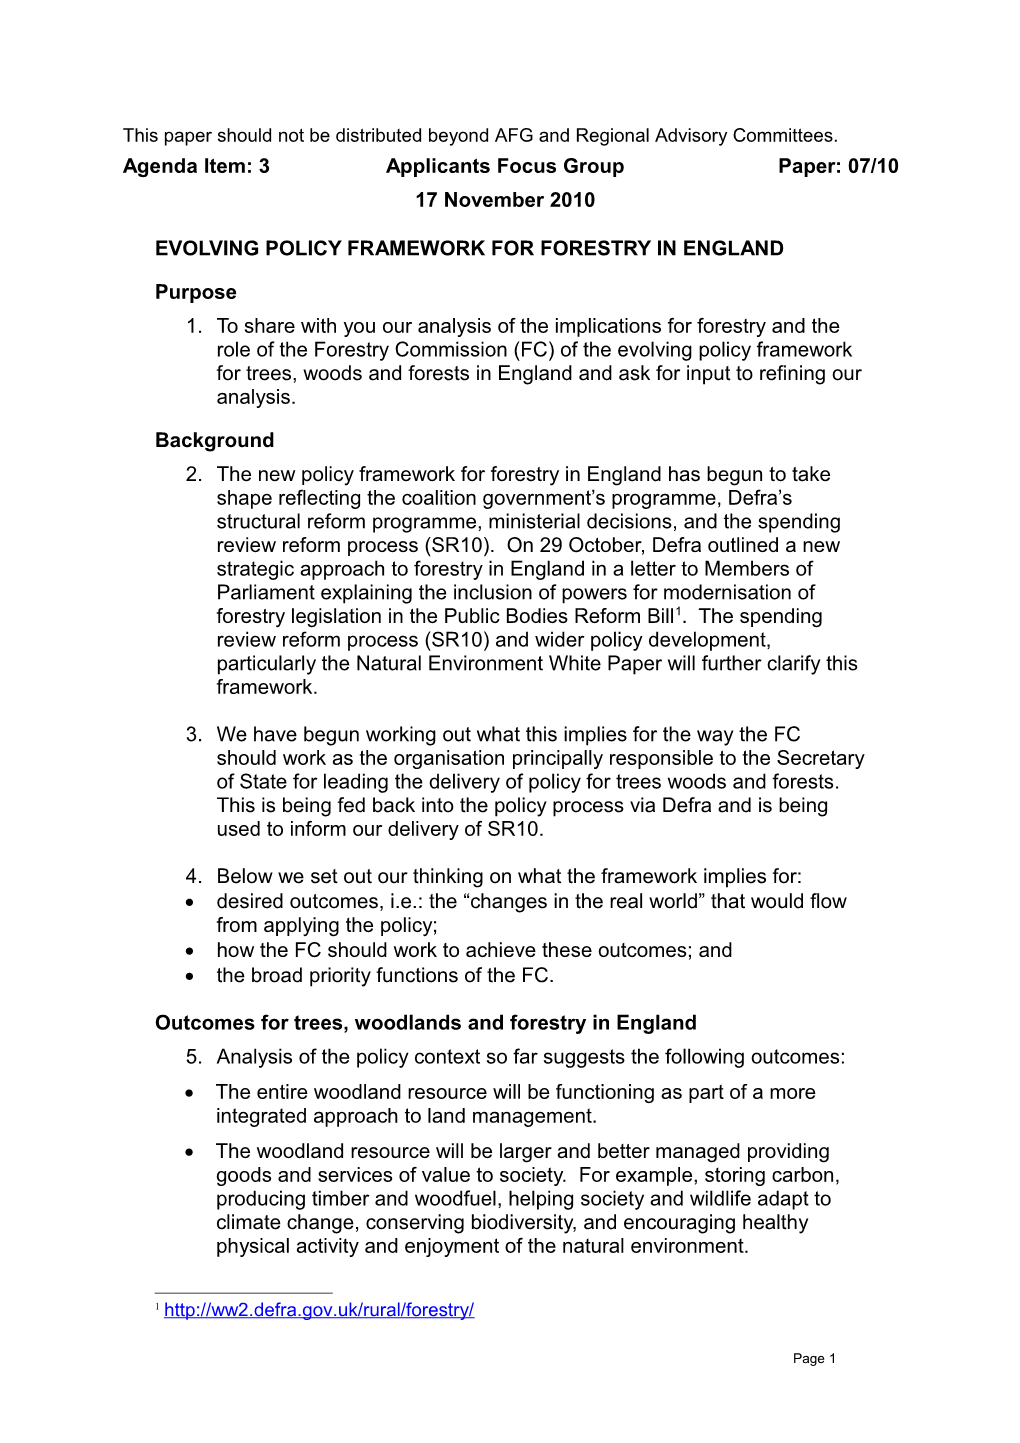 Evolving Policy Framework for Forestry in England